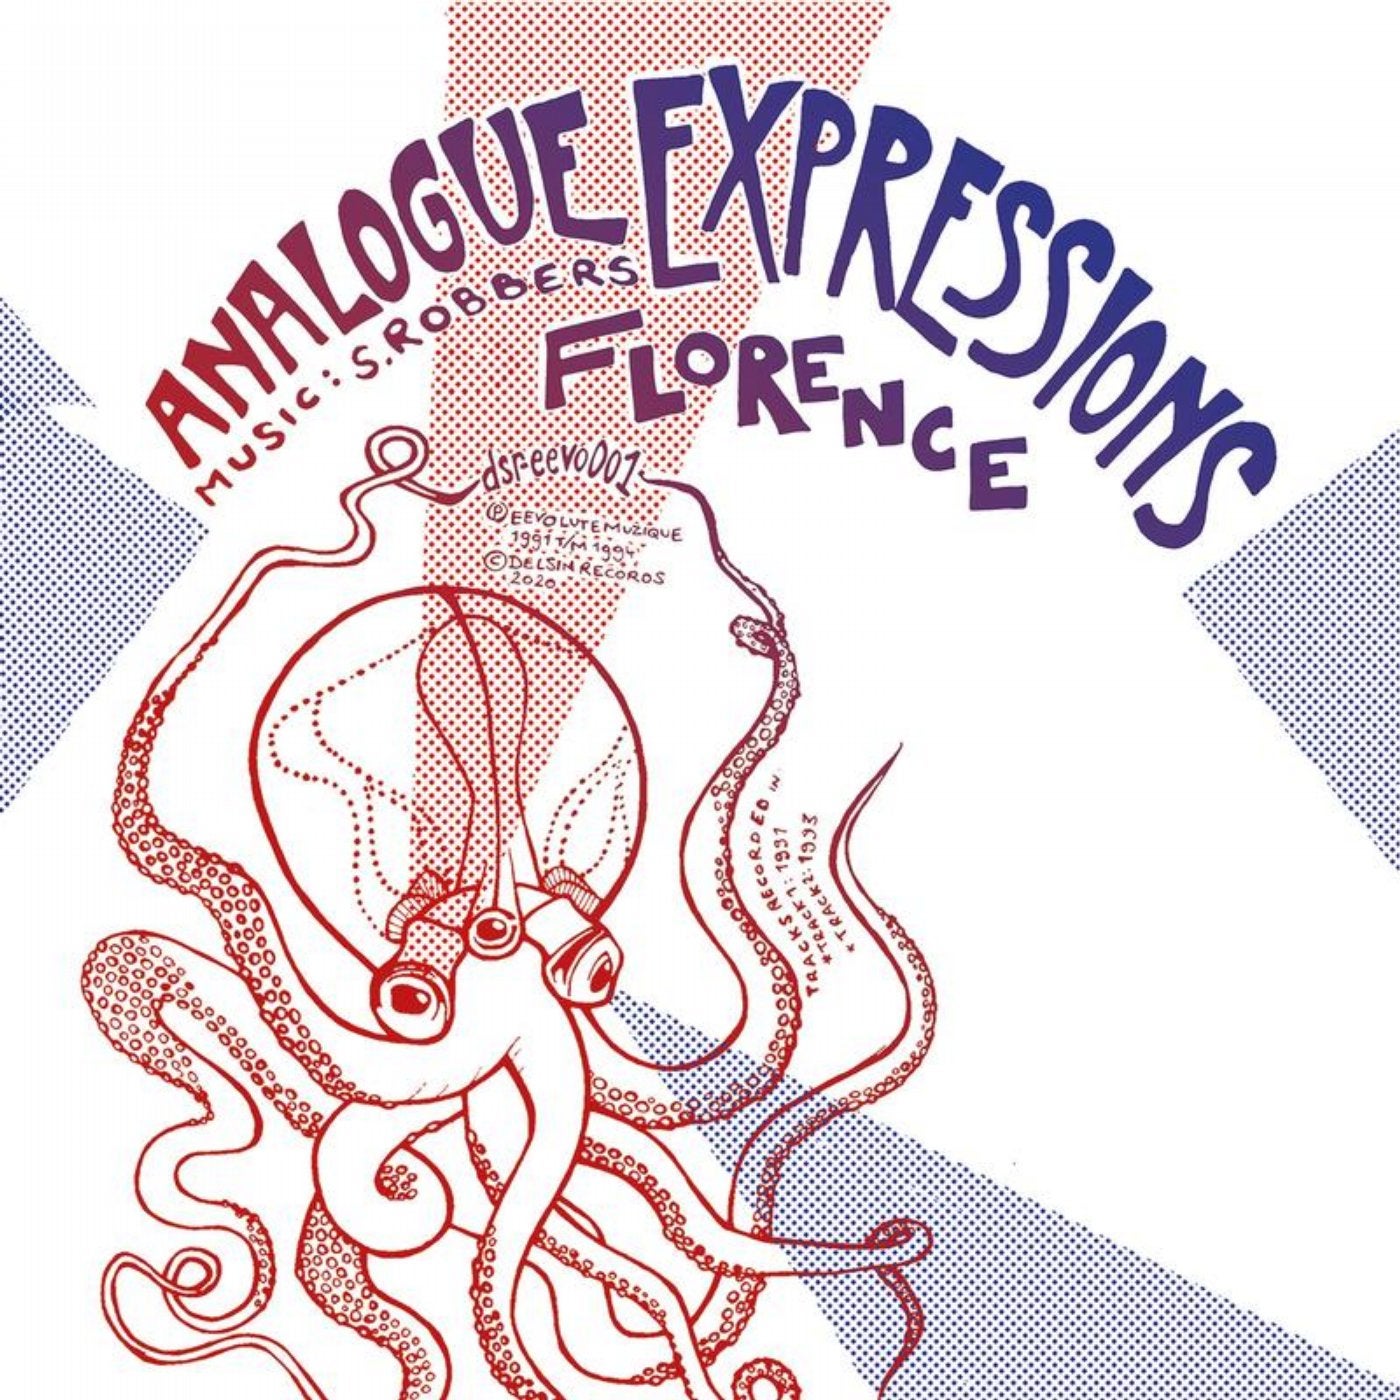 Analogue Expressions